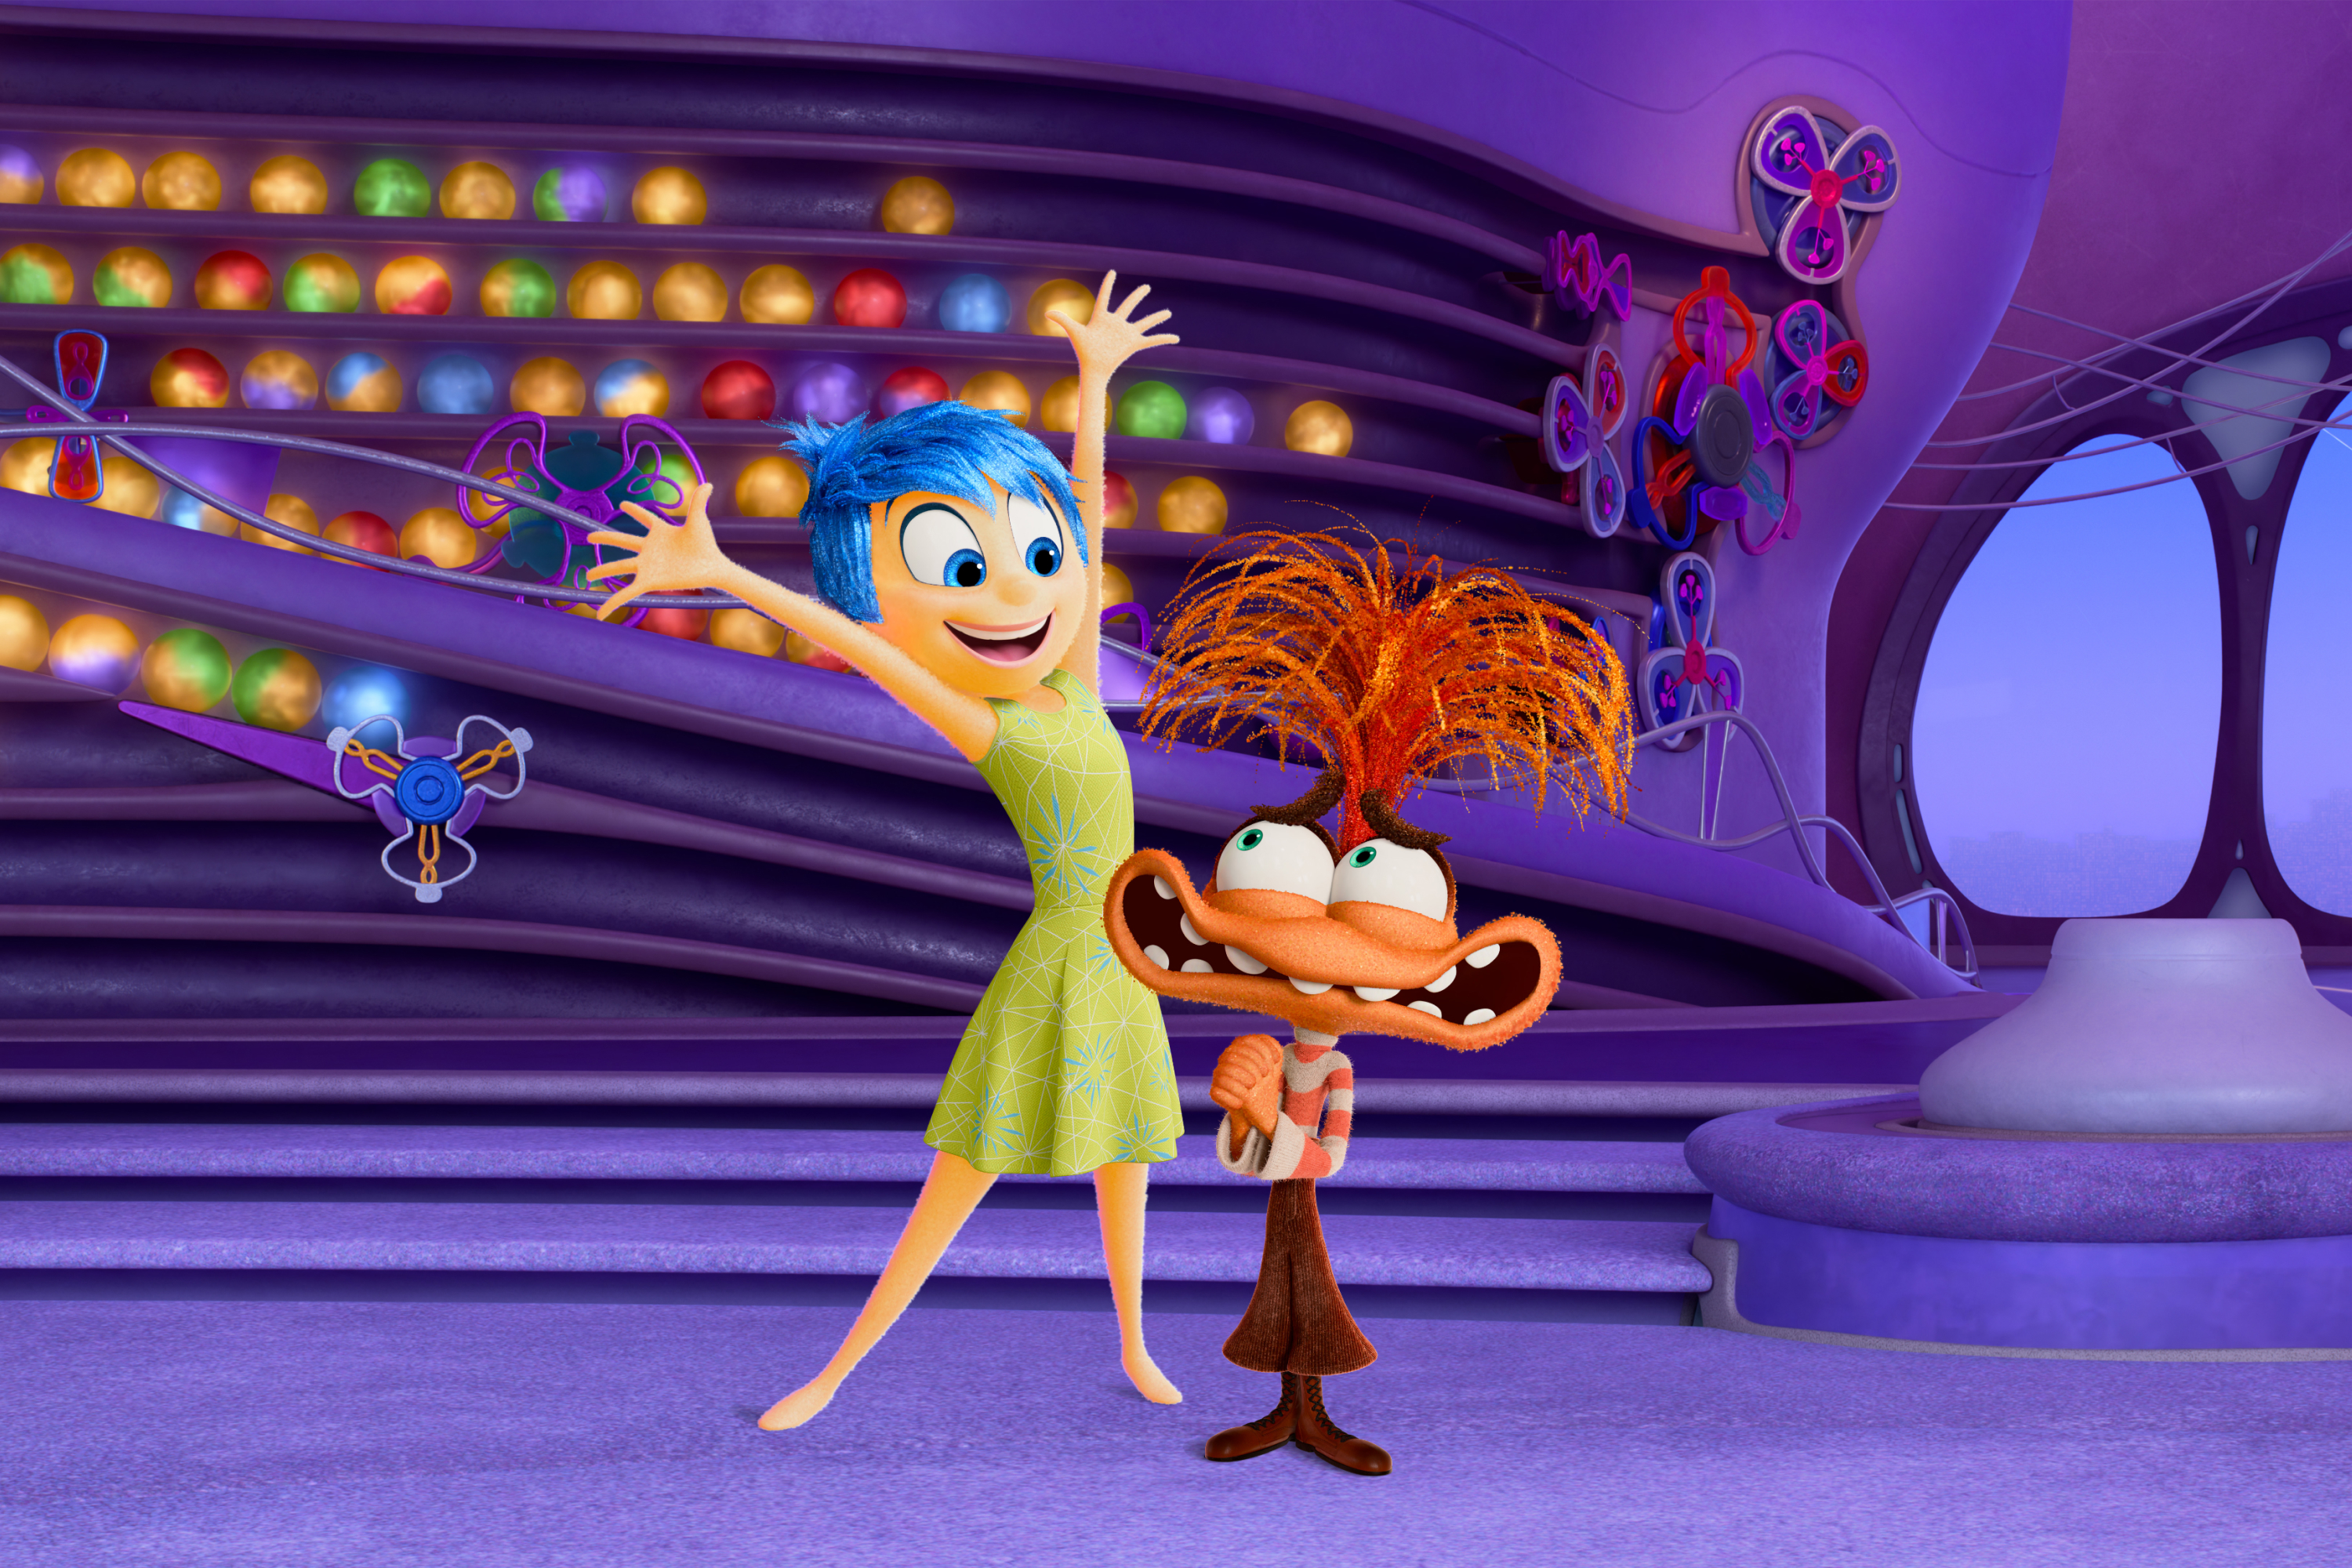 Animated characters Joy and Fear from Inside Out, Joy is smiling with arms raised, Fear is grimacing. They stand in front of a whimsical, purple backdrop